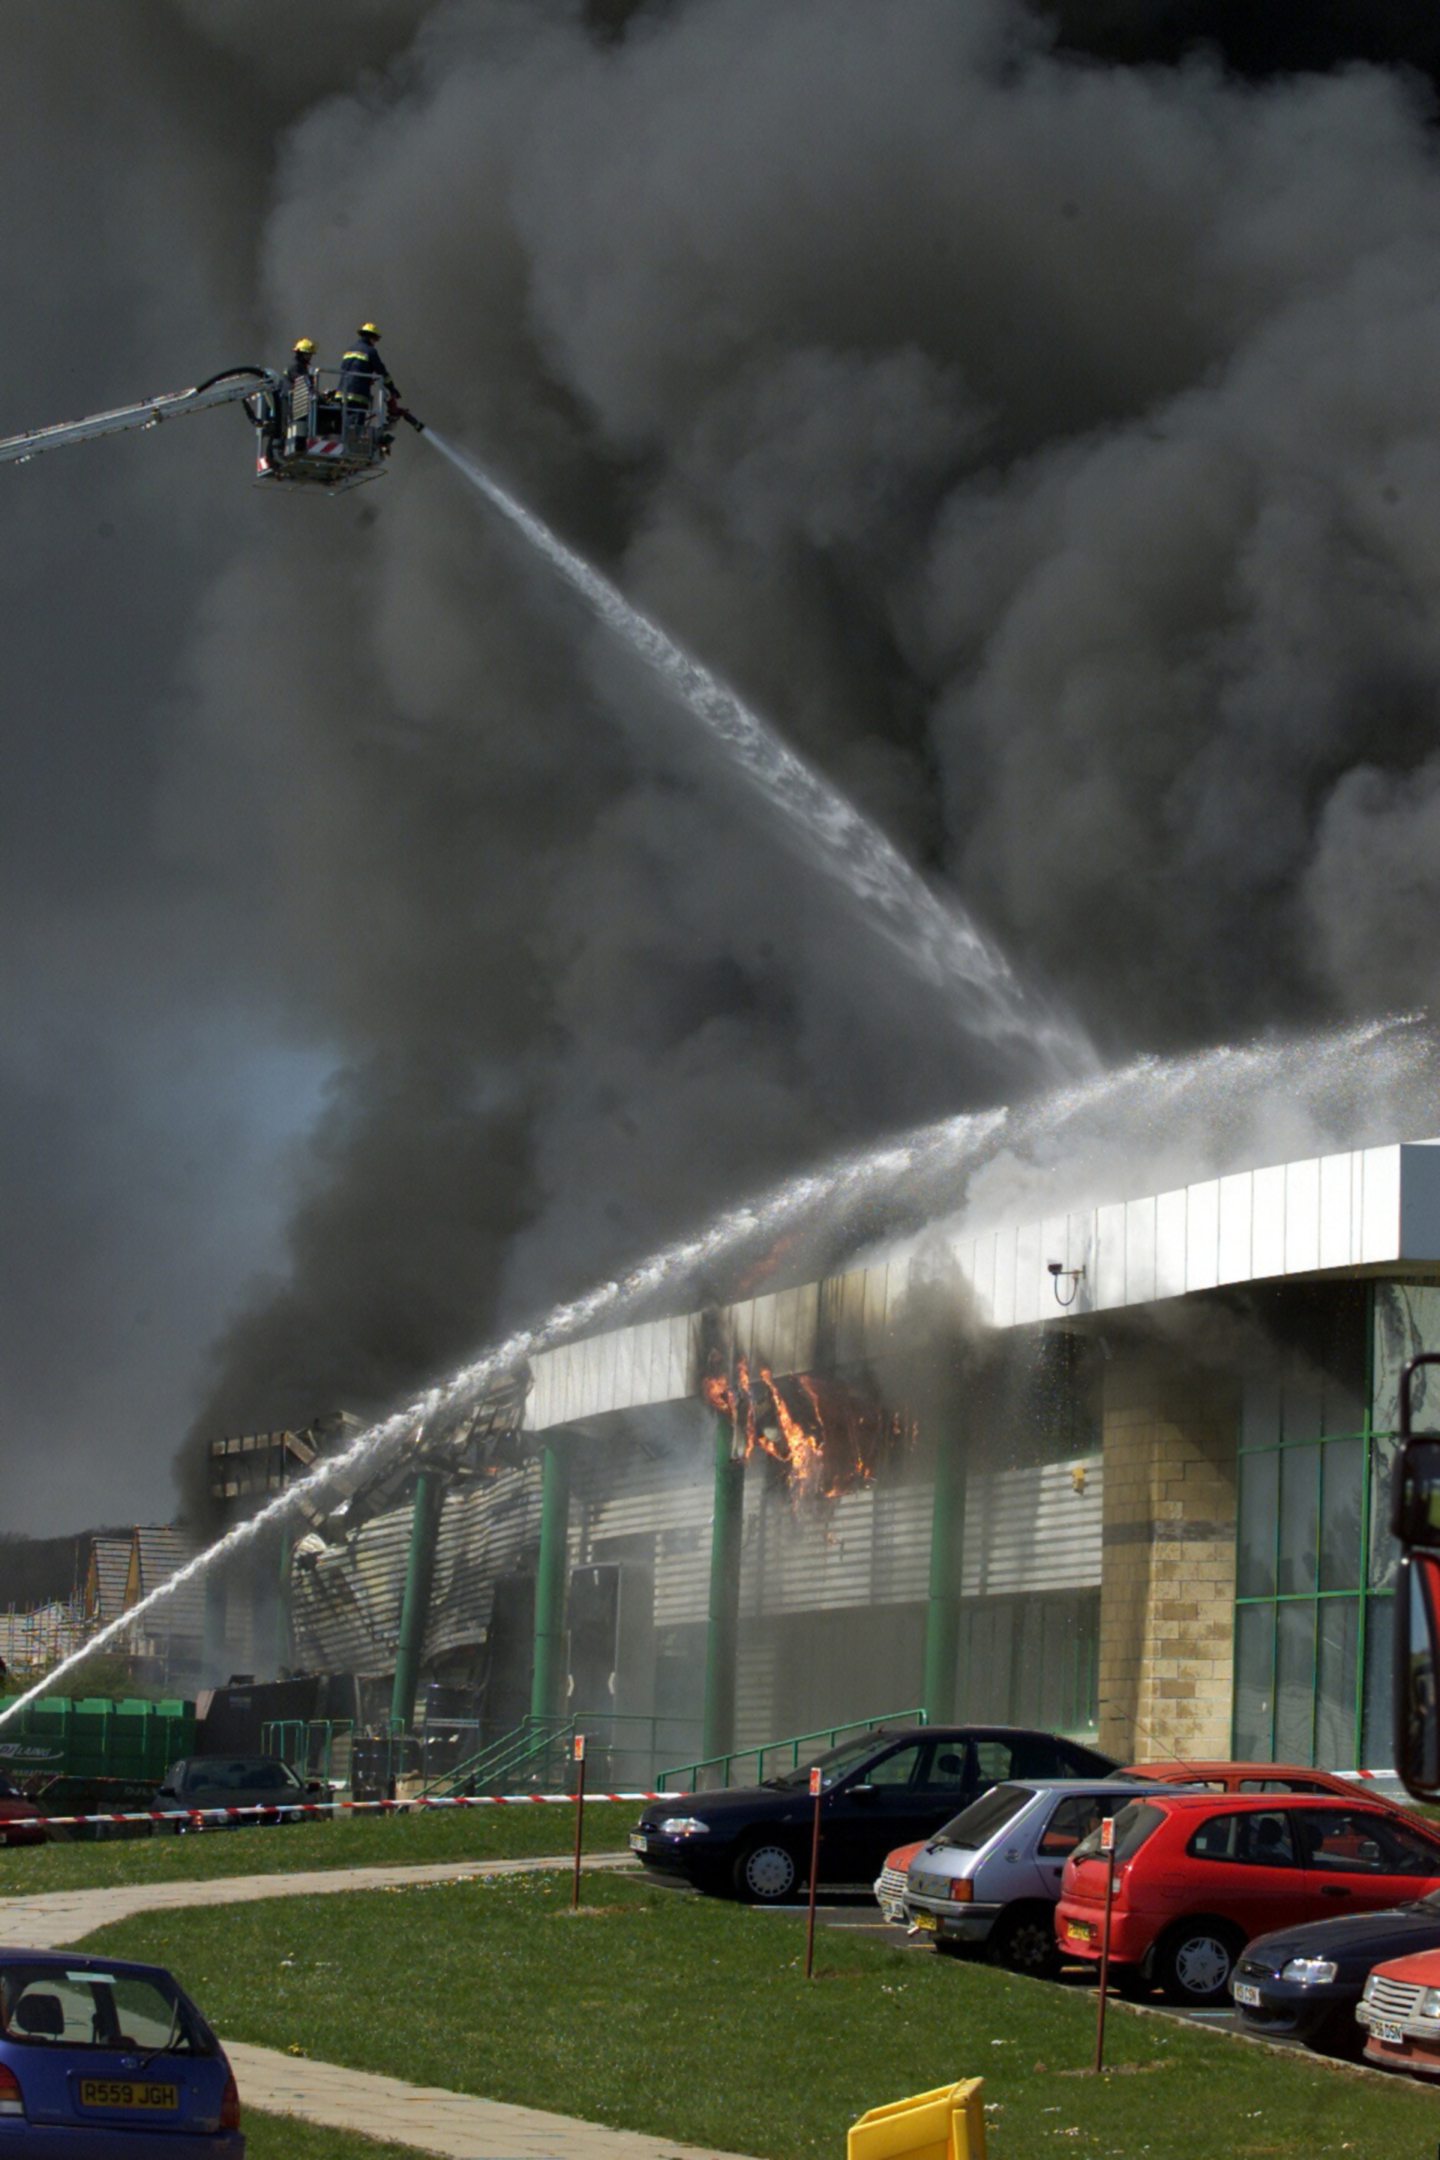 The smoke continued to rise hours after the explosion.